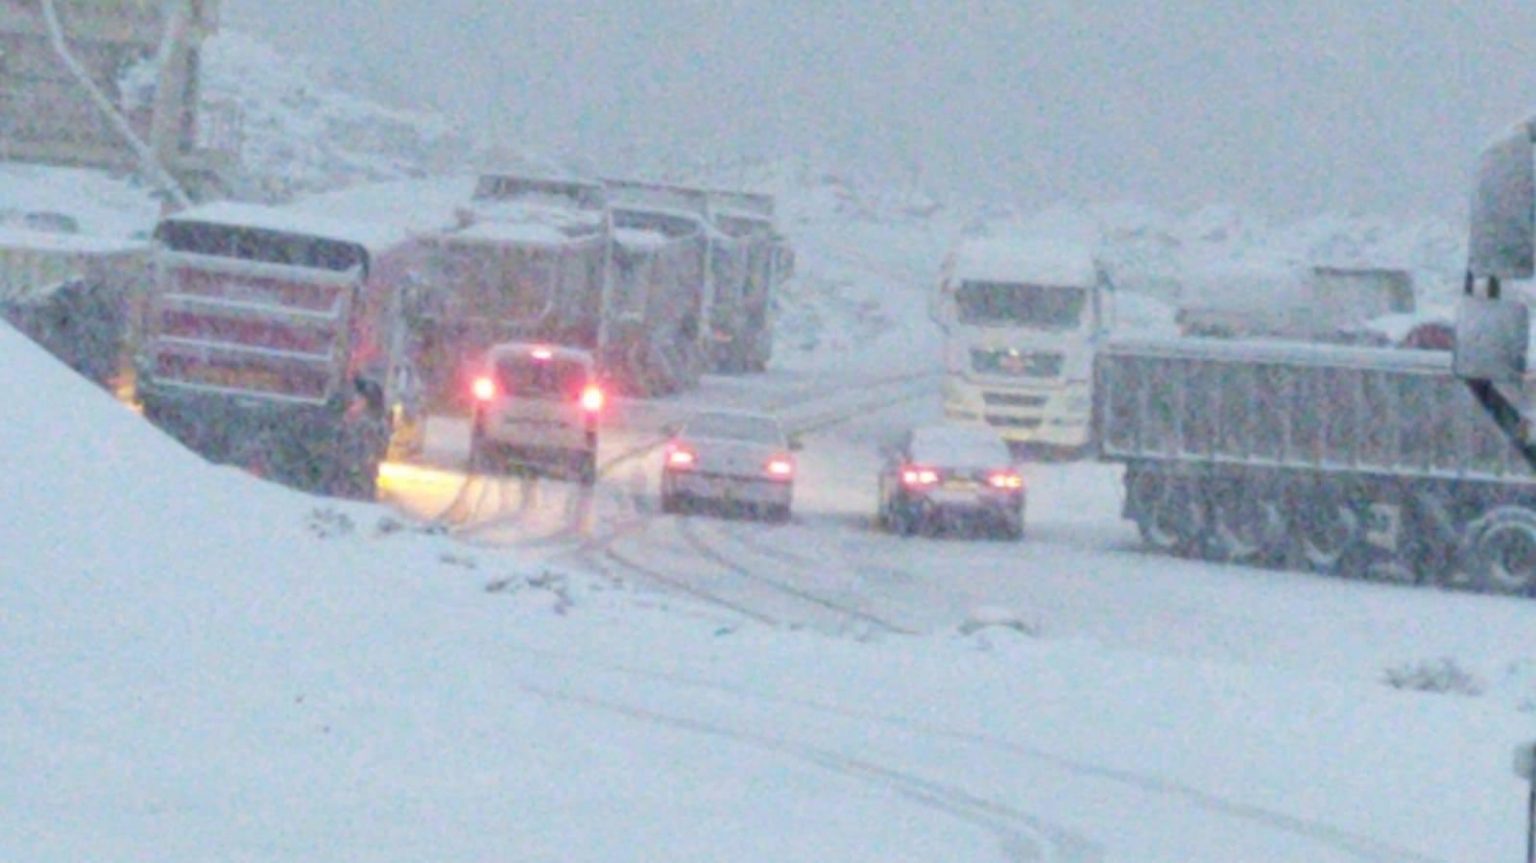 Heavy snowfall landed overnight on stretches of the Ronda to San Pedro section of the A-397